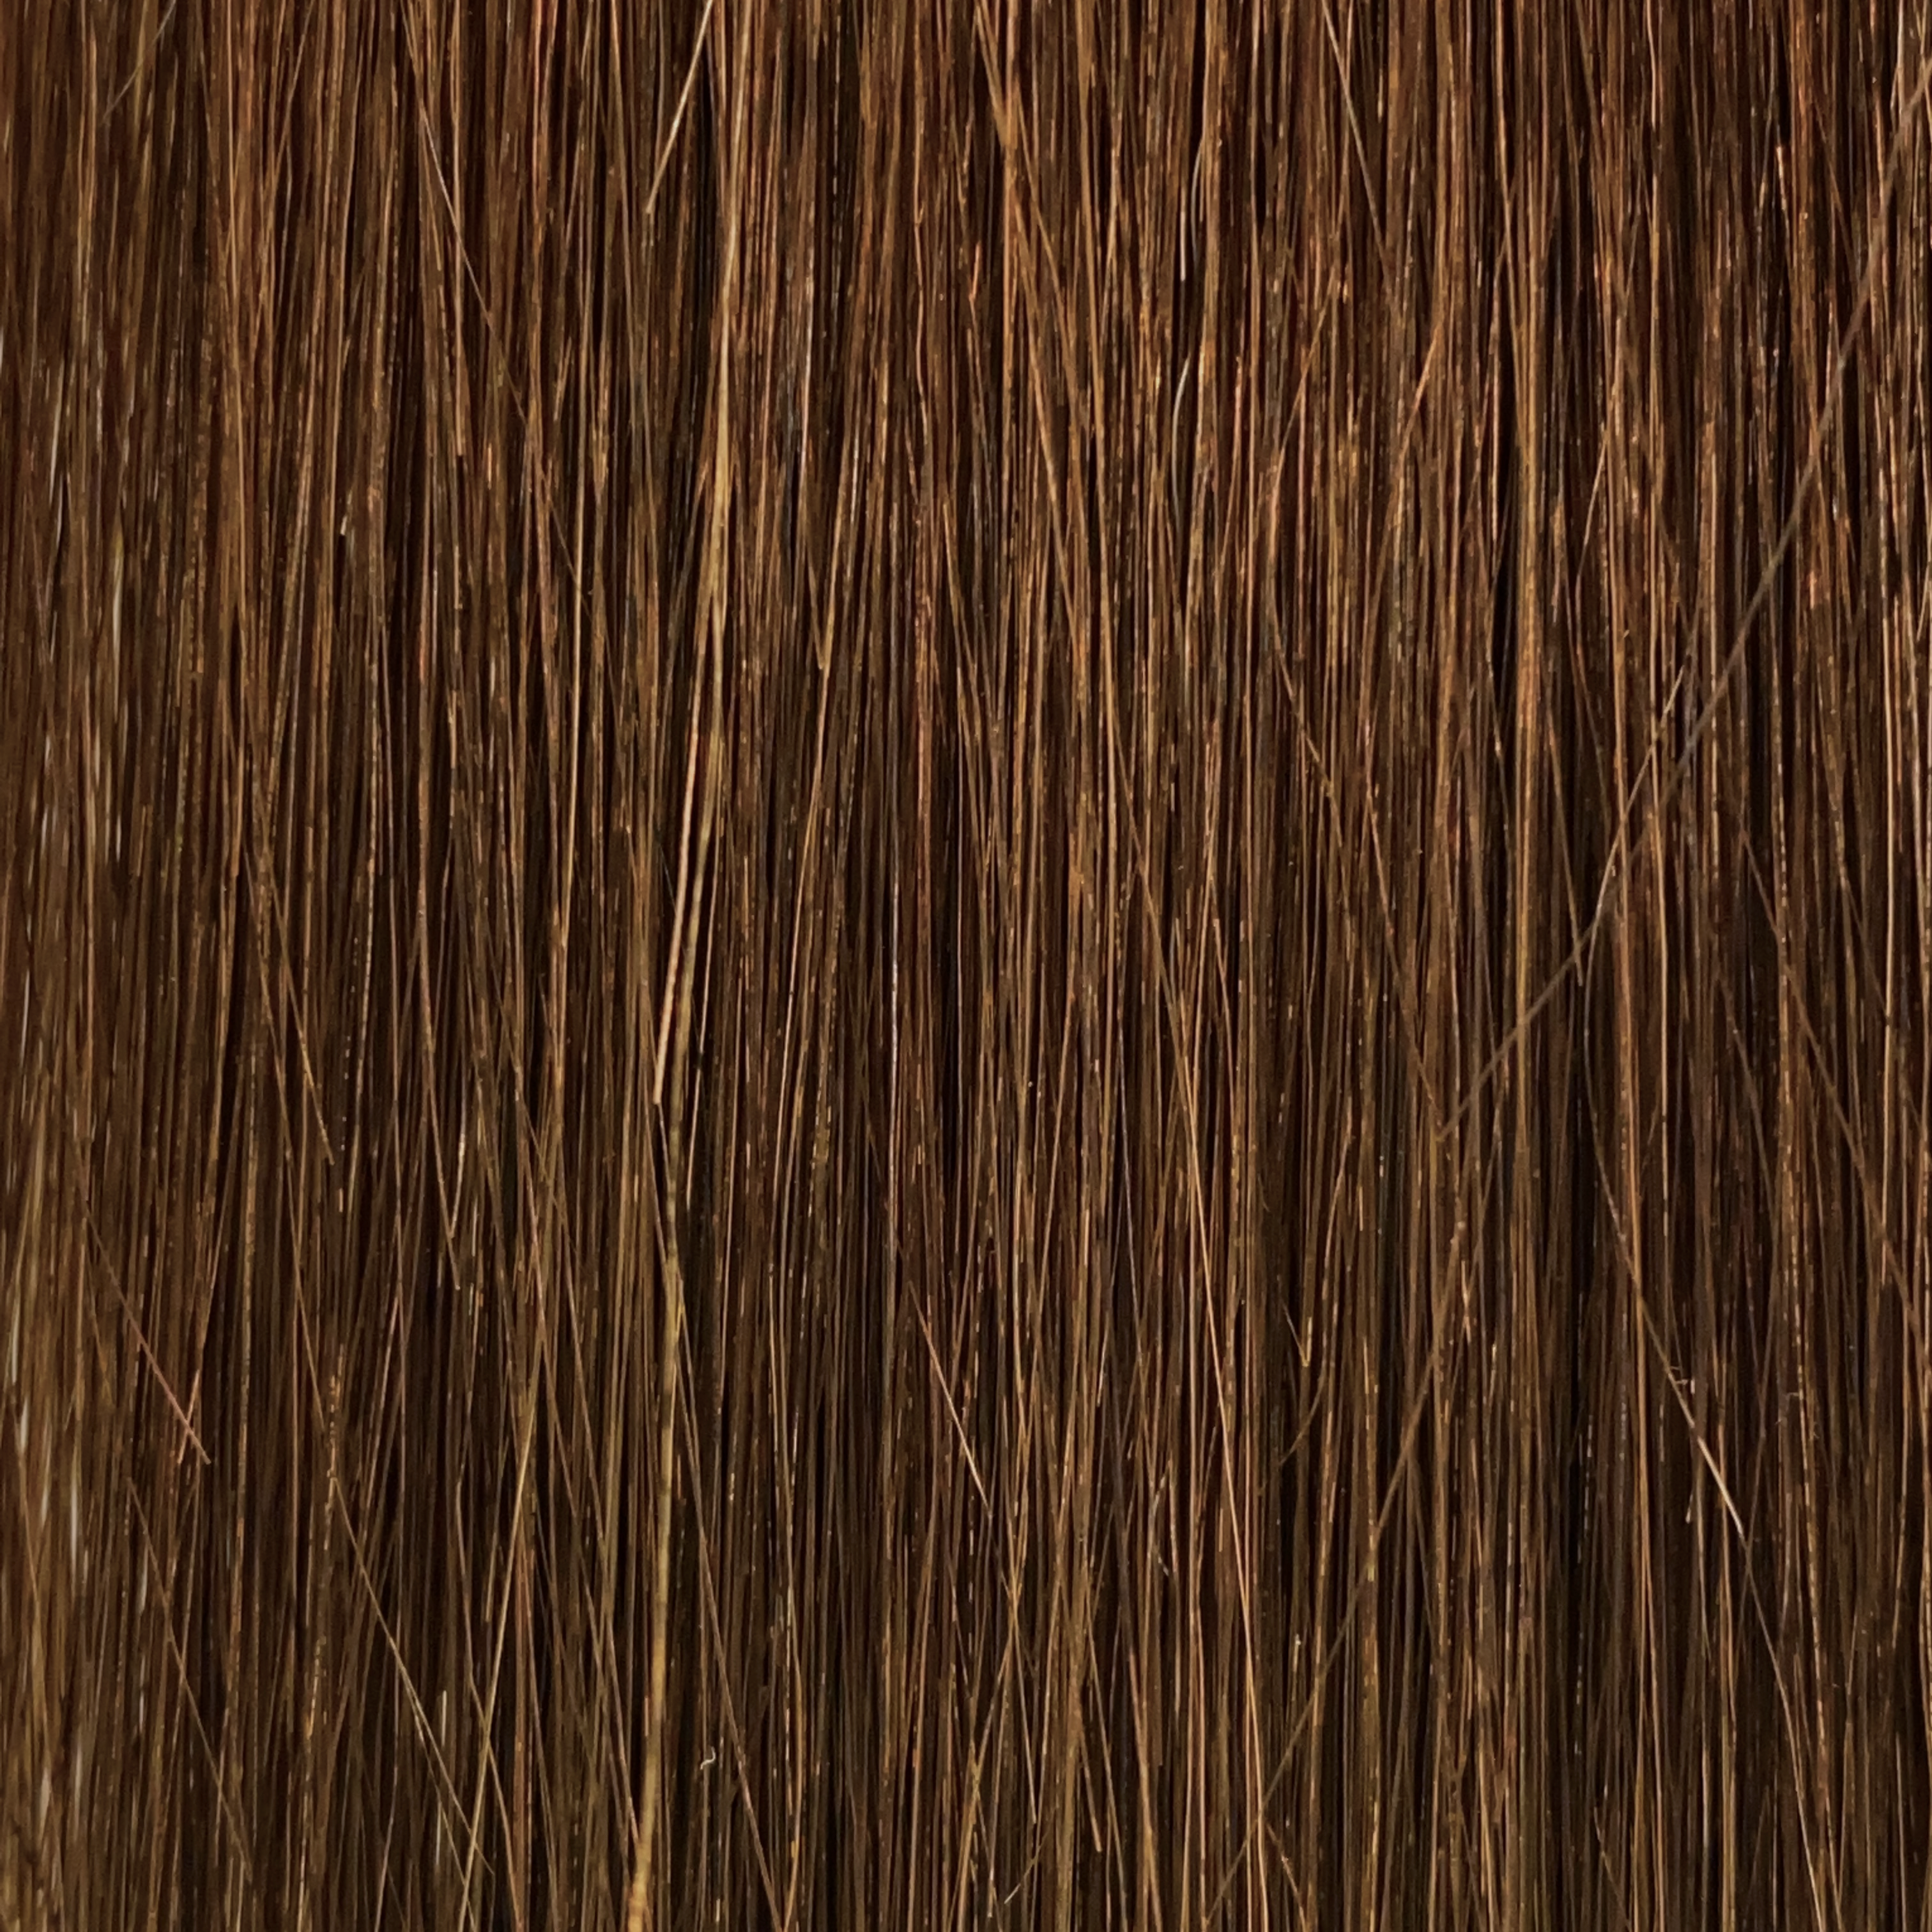 50 cm | Normal Tape Extensions | No. 04 hazelnut brown